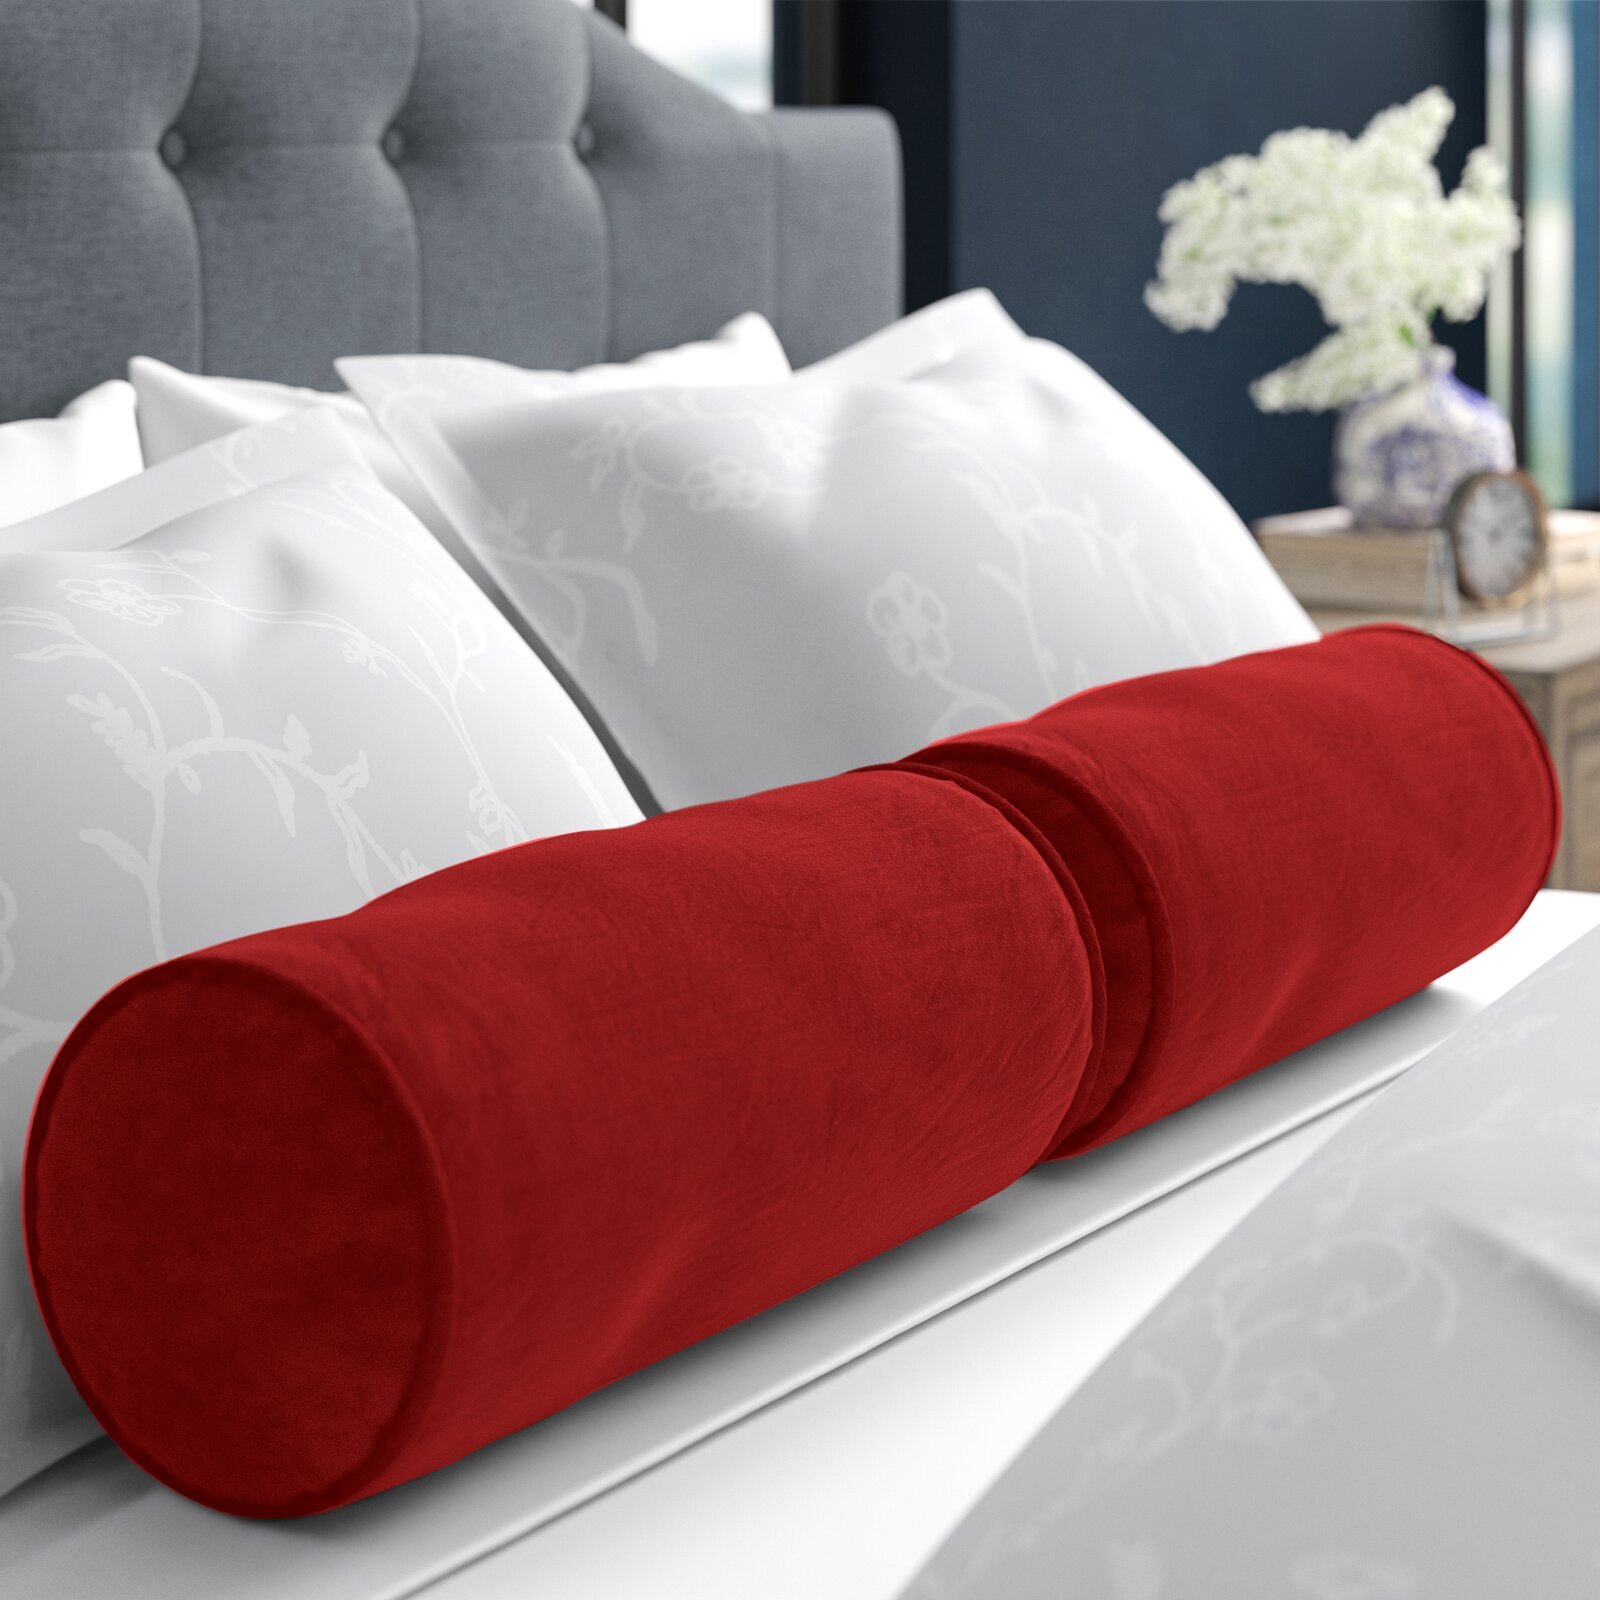 What Are The Long Round Pillows Called